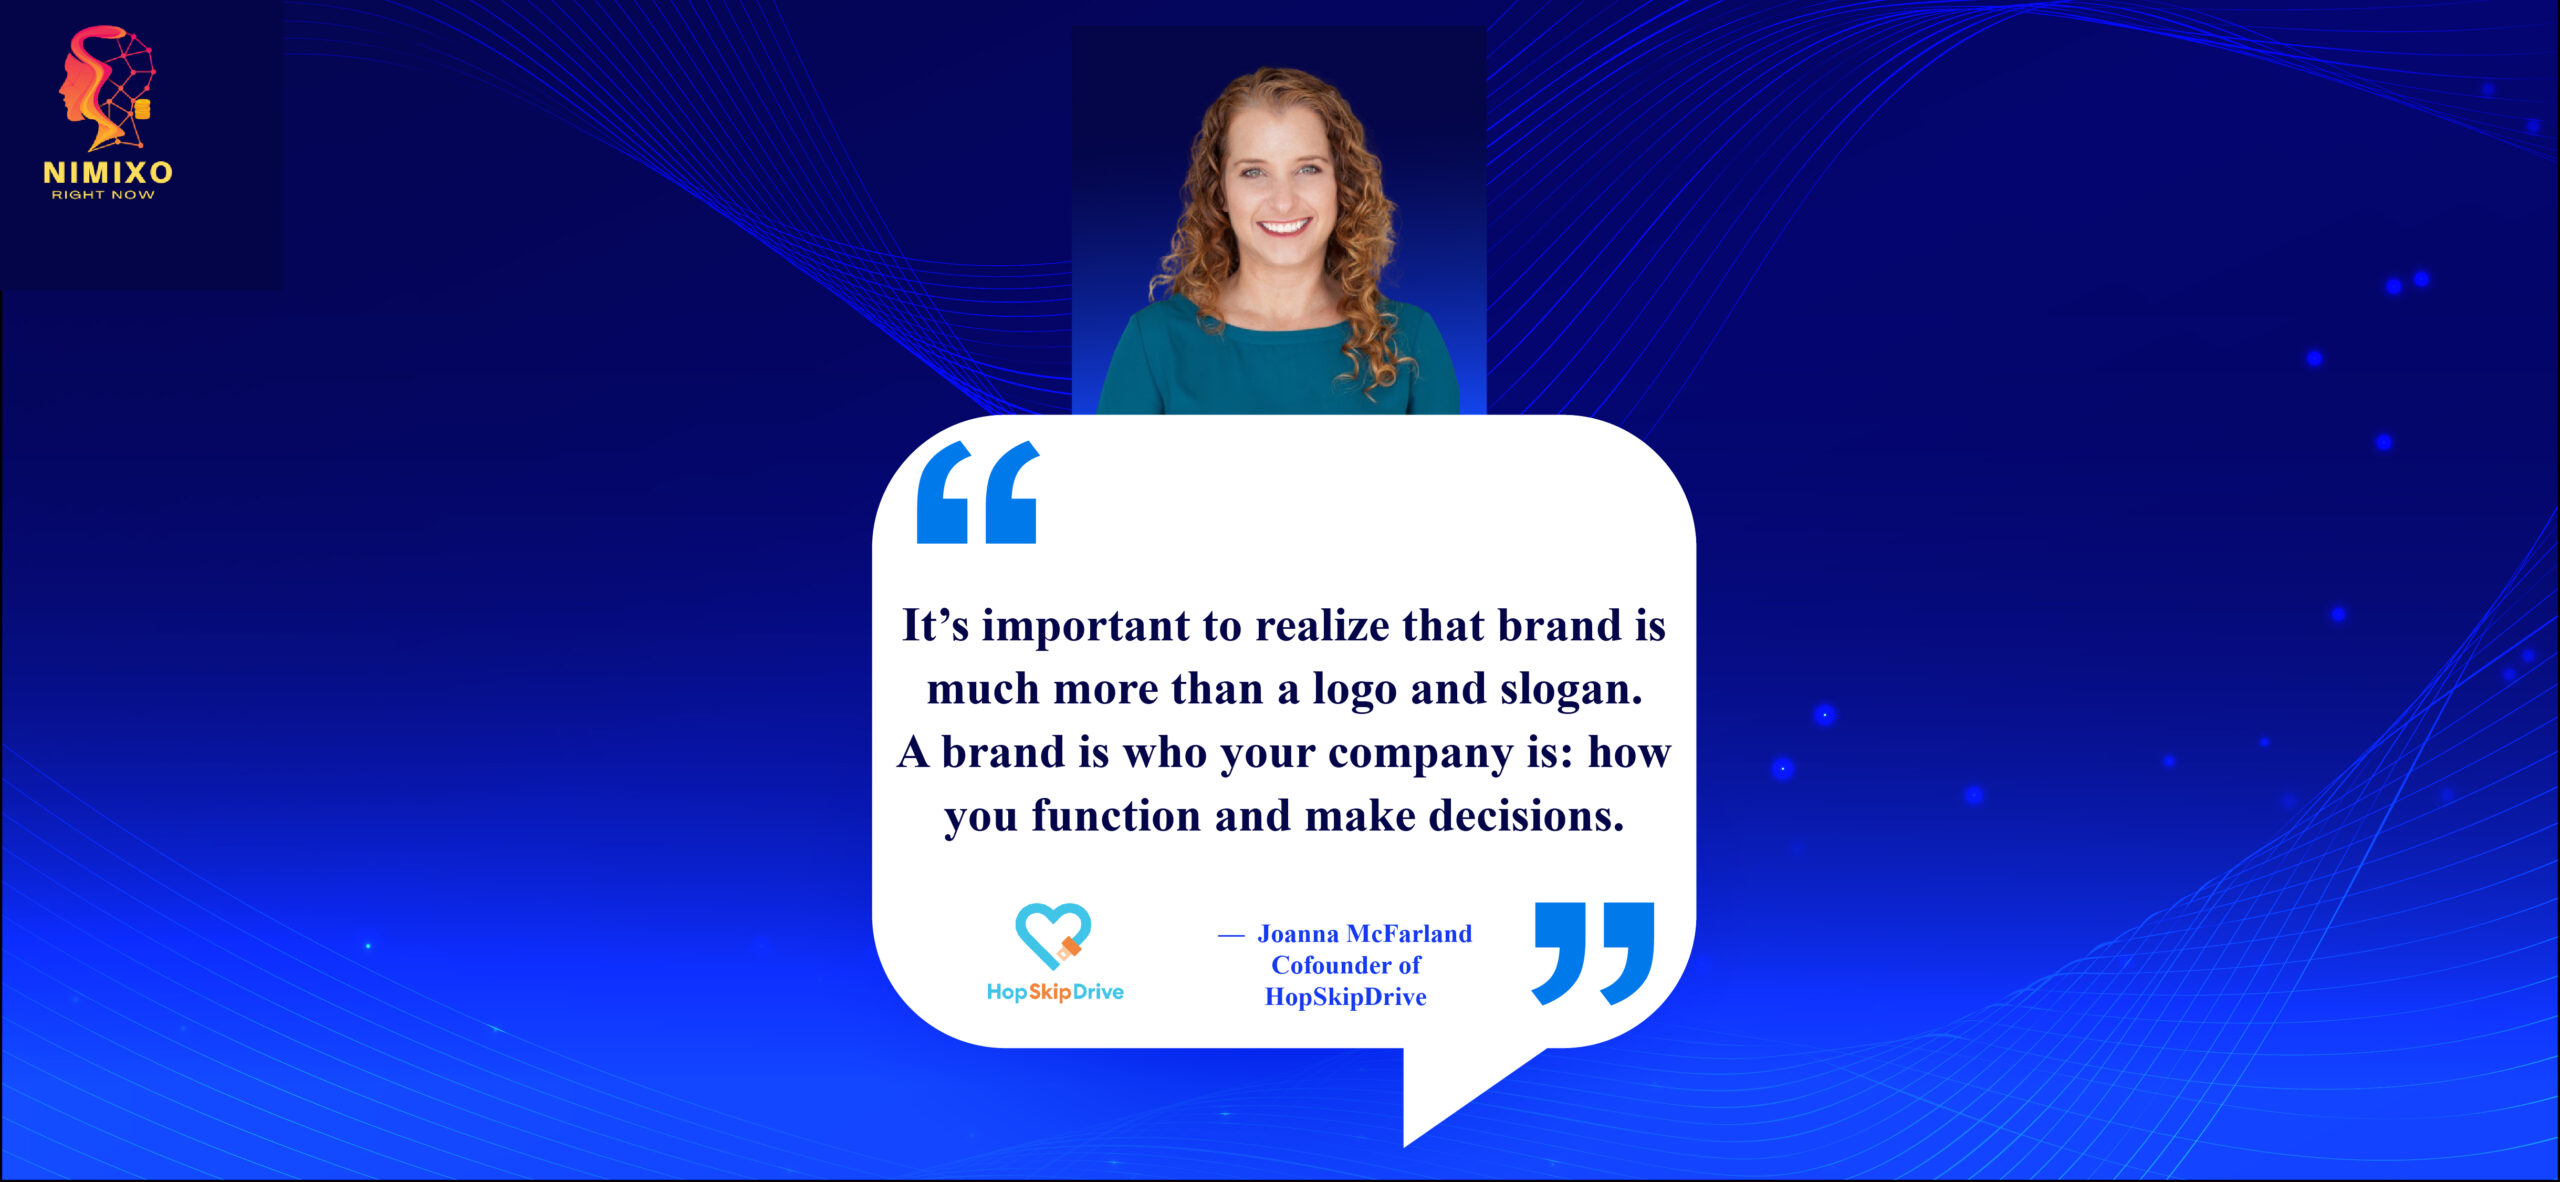 Beyond Buzzwords: 3 Powerful Ways Your Actions Define Your Brand It’s important to realize that brand is much more than a logo and slogan. A brand is who your company is: how you function and make decisions. -Joanna McFarland, Co-founder of HopSkipDrive